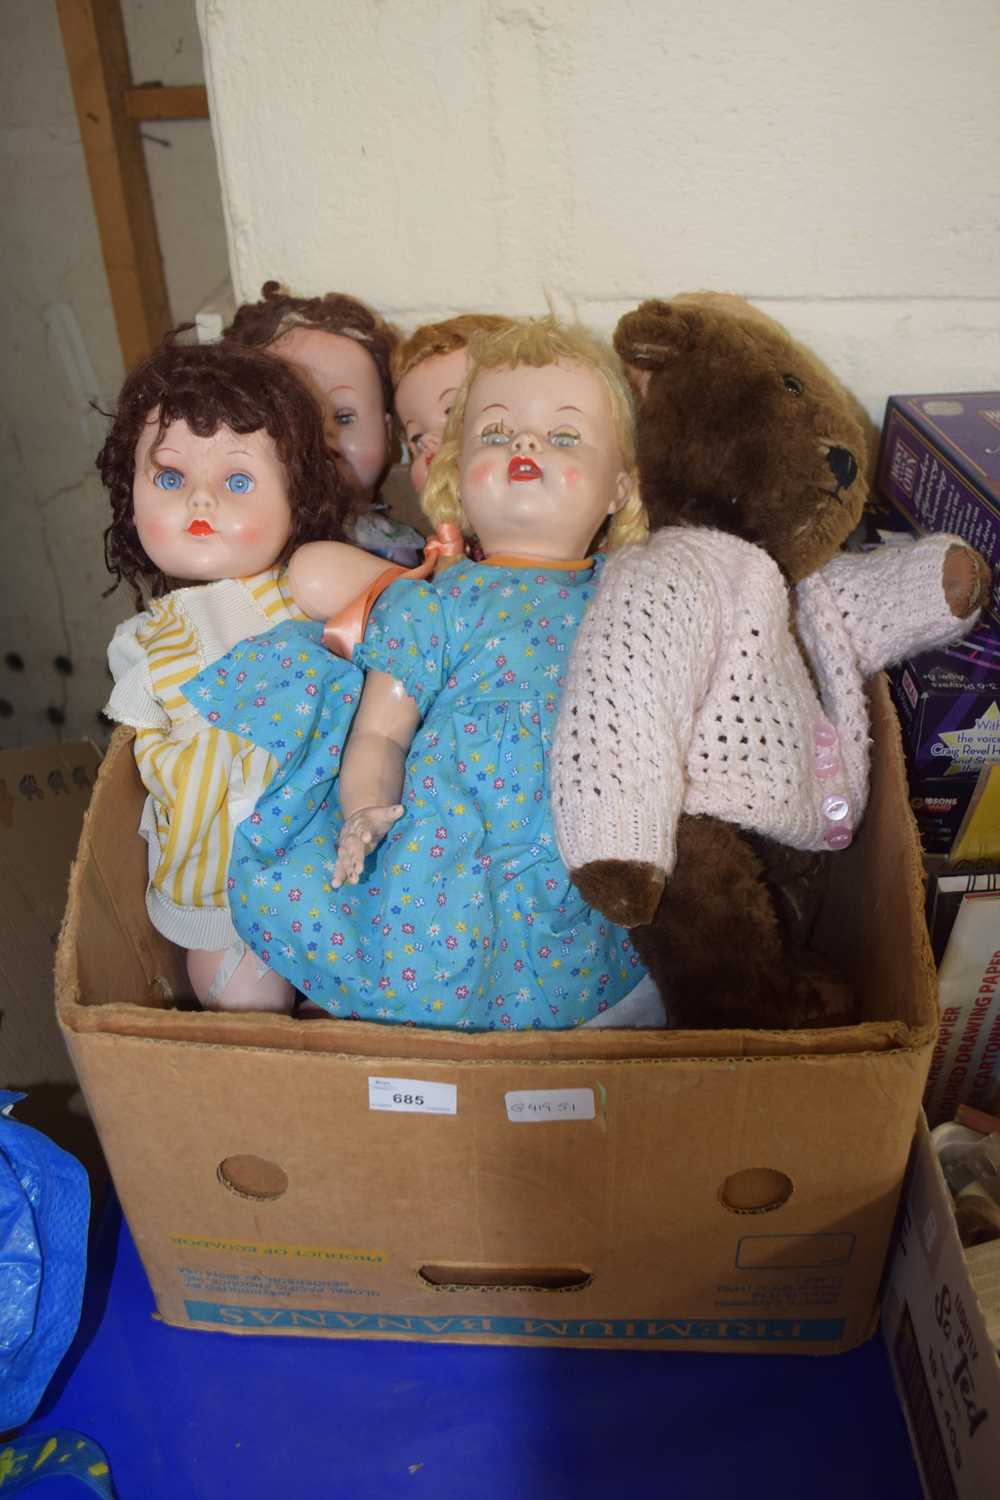 Quantity of dolls and a teddy bear